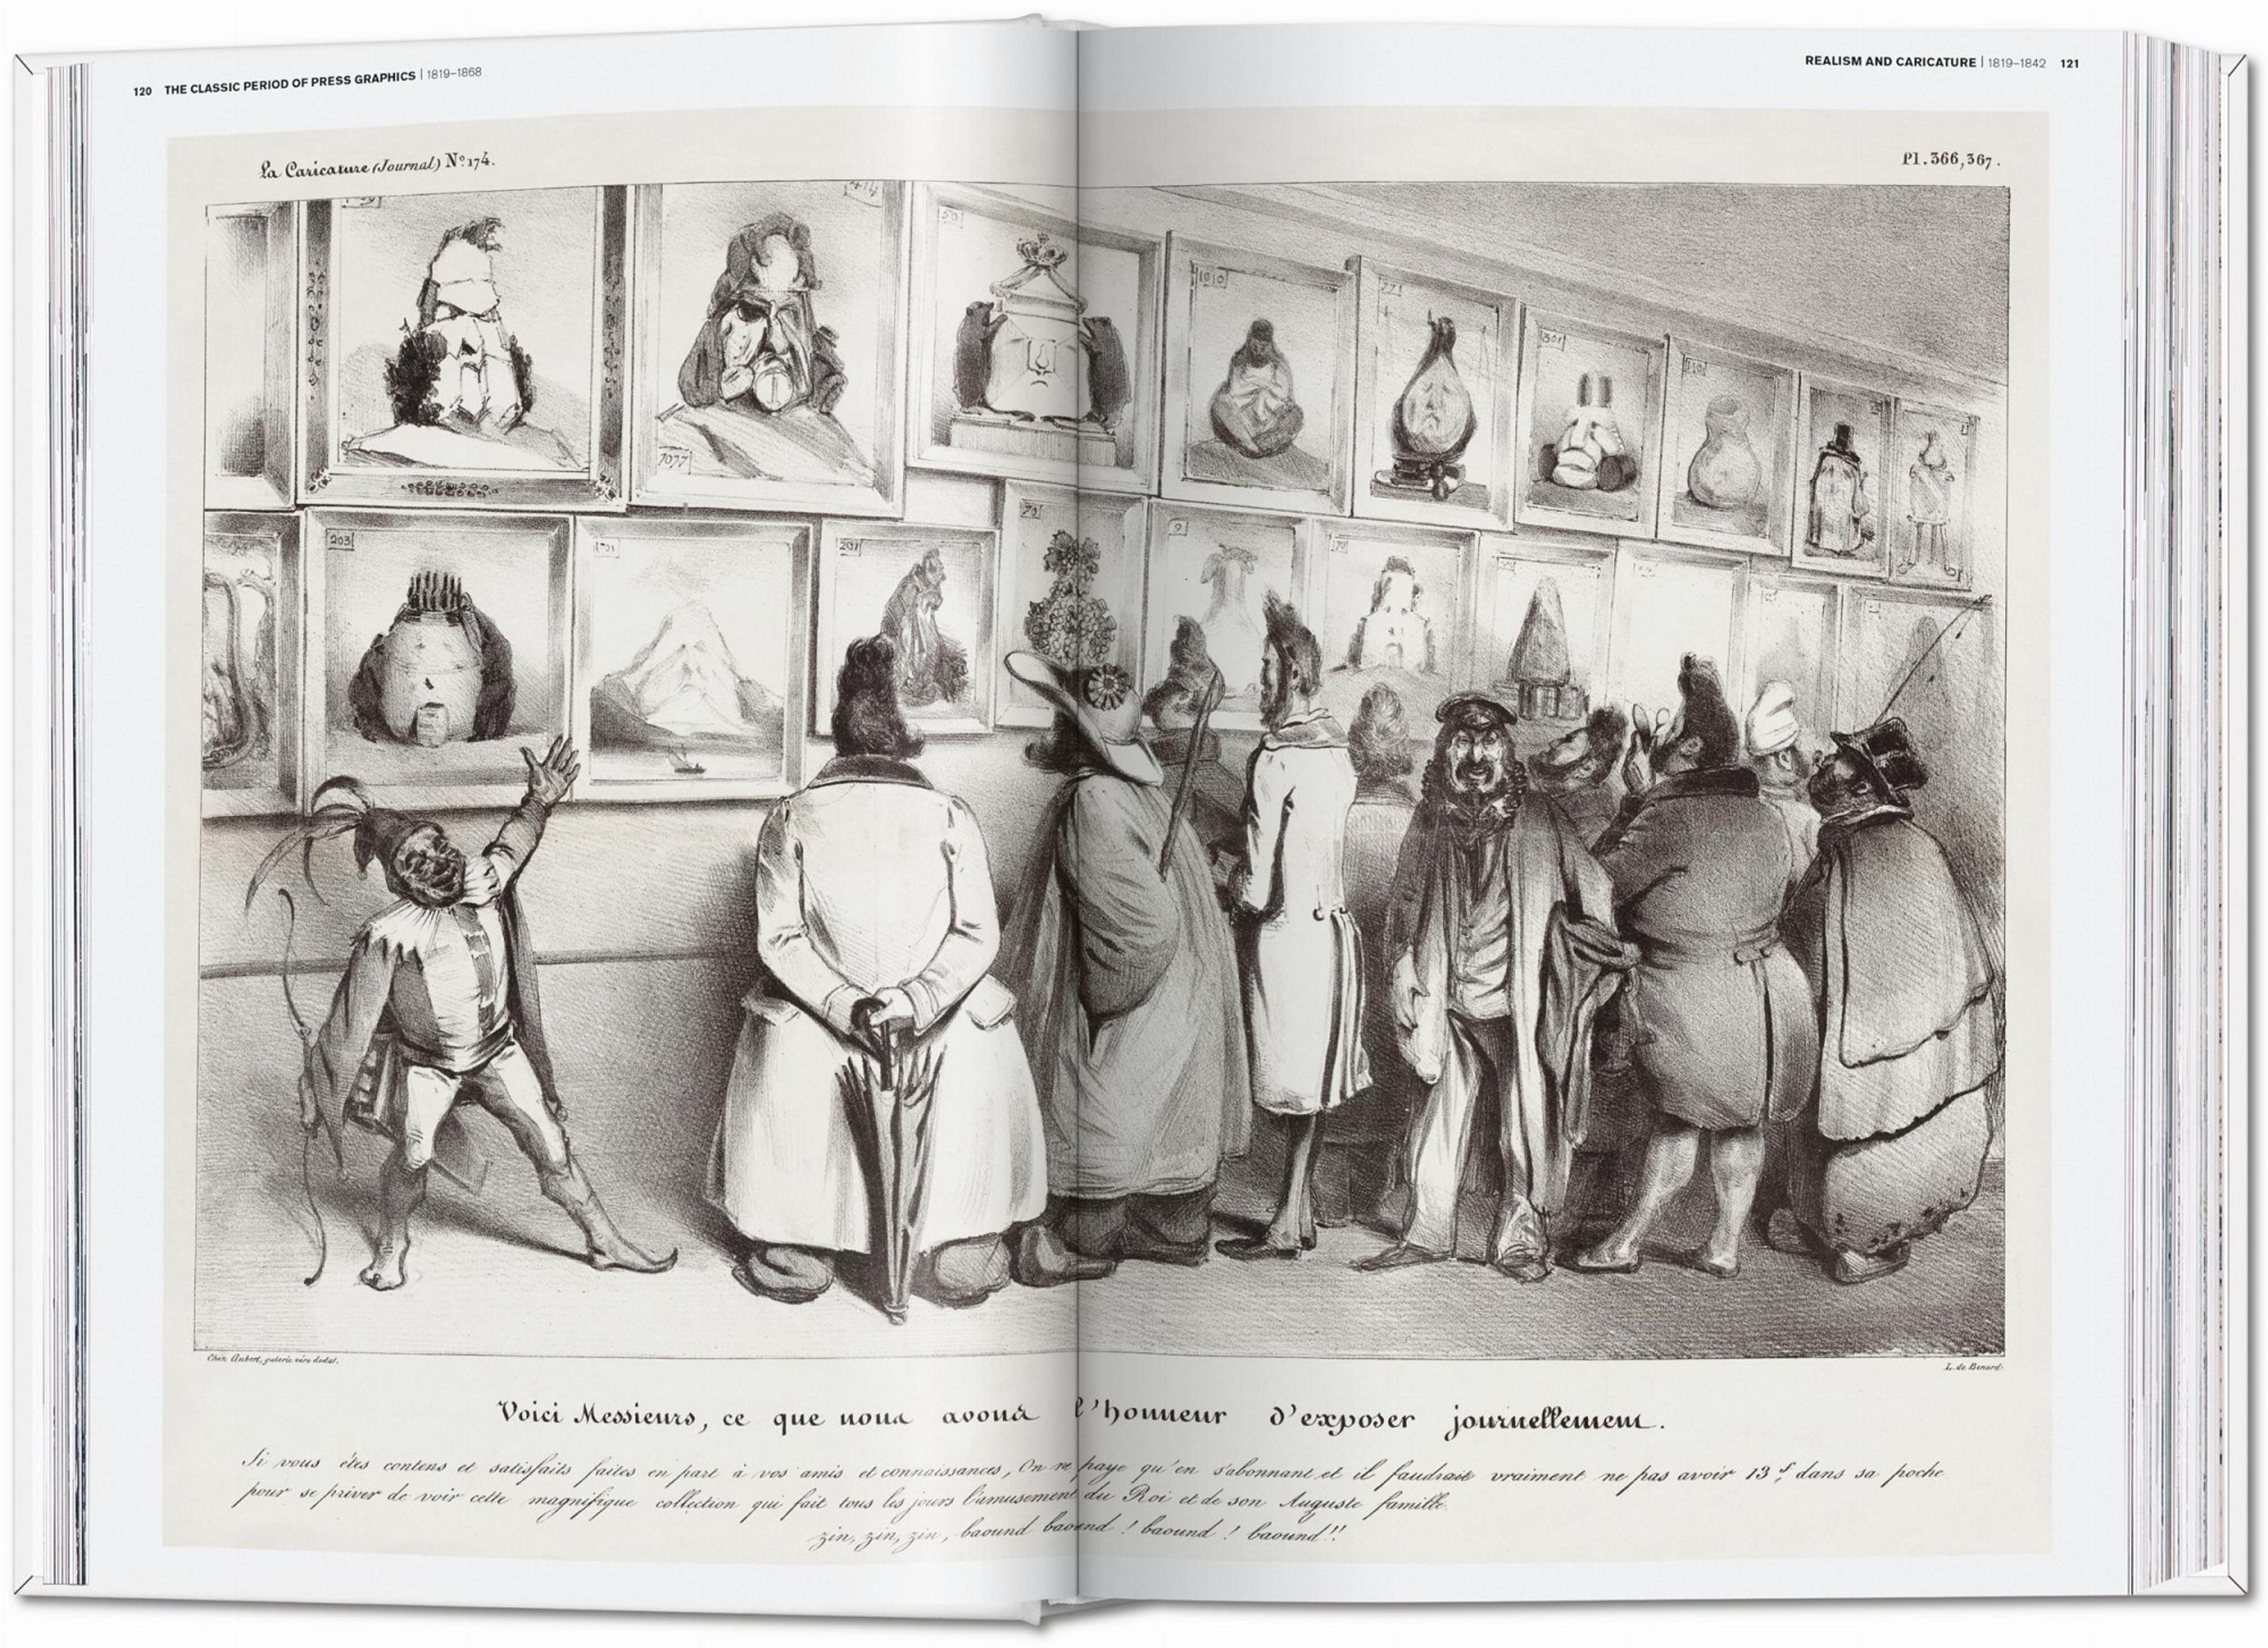 Photograph of an open book with an illustration of people looking at a gallery of portraits made of different objects